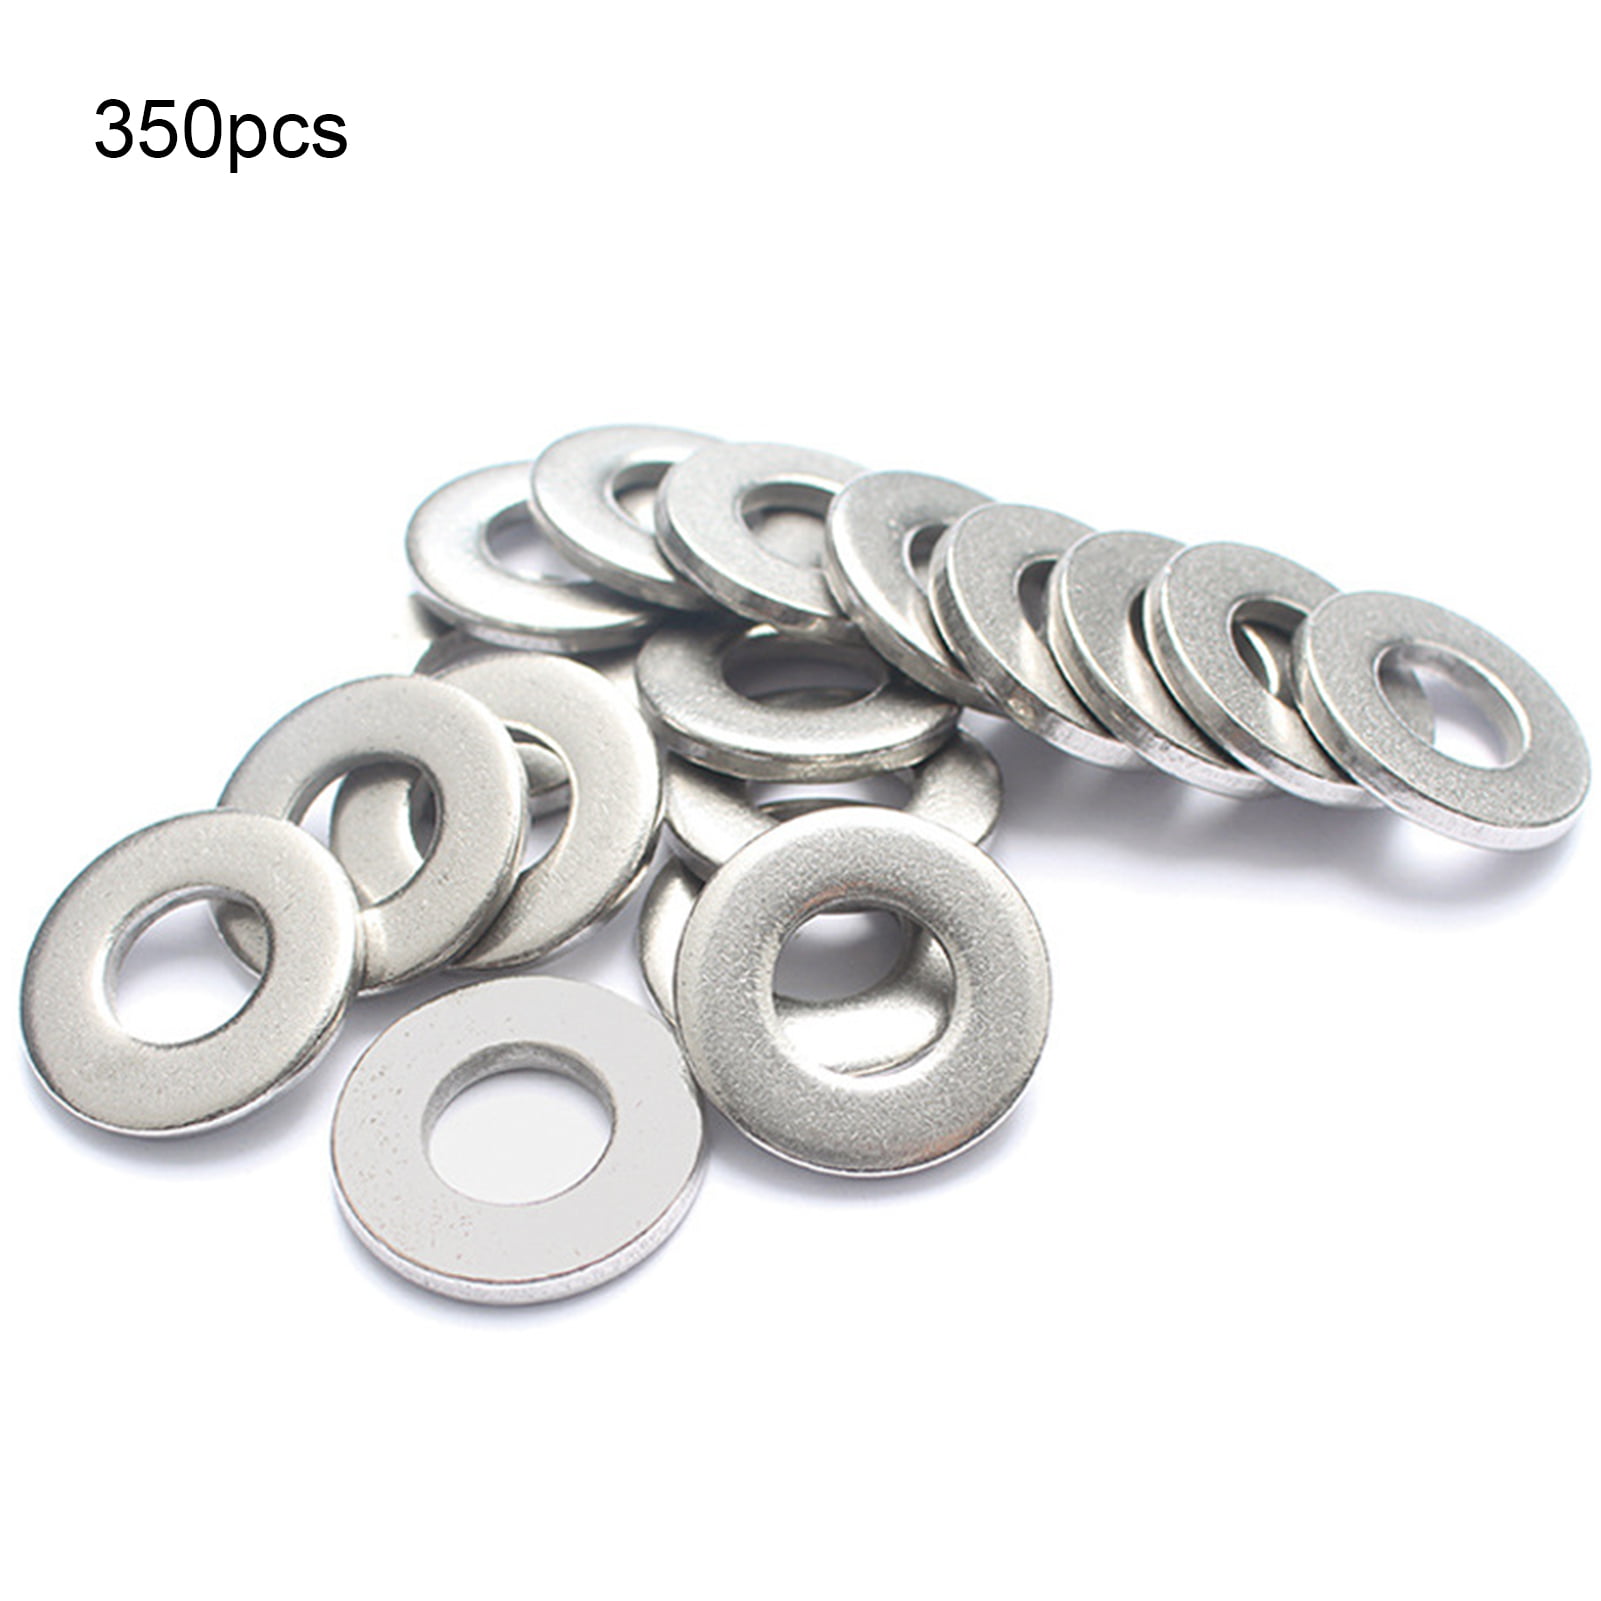 U disk A2 Stainless Steel M5 DIN125 Small Washers Body Washer 